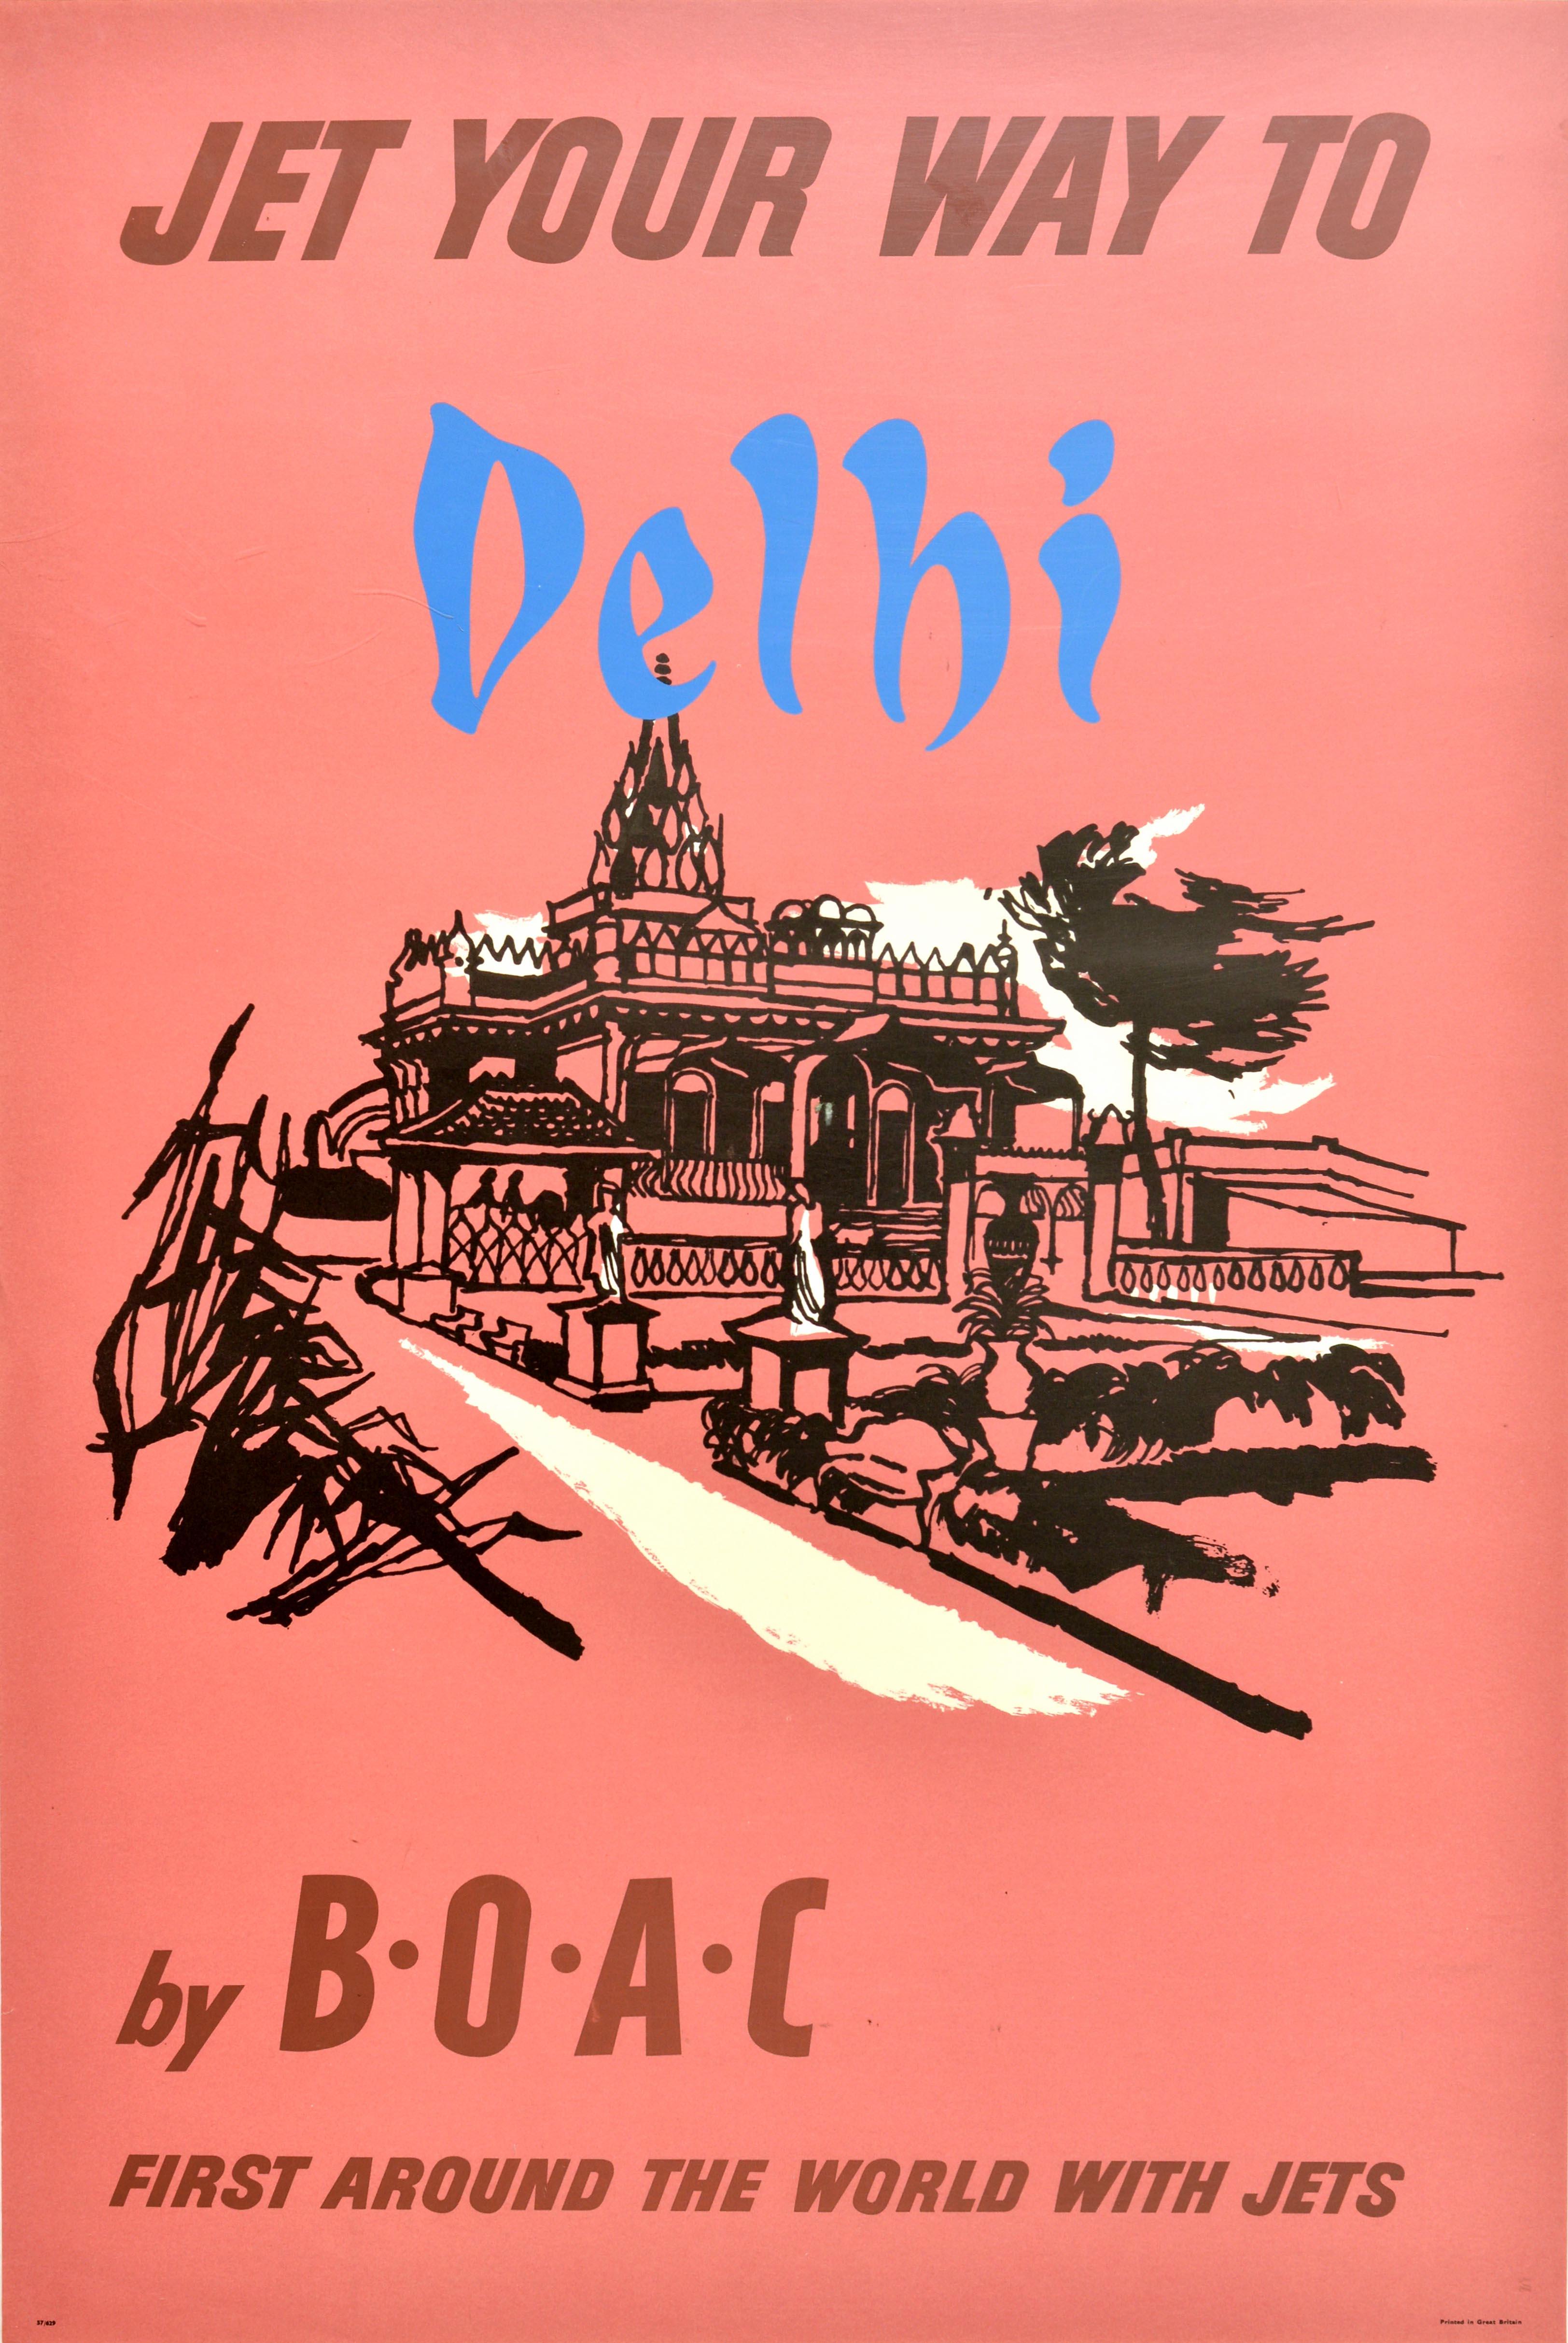 Unknown Print - Original Vintage Poster Jet Your Way To Delhi By BOAC India World Travel Airline